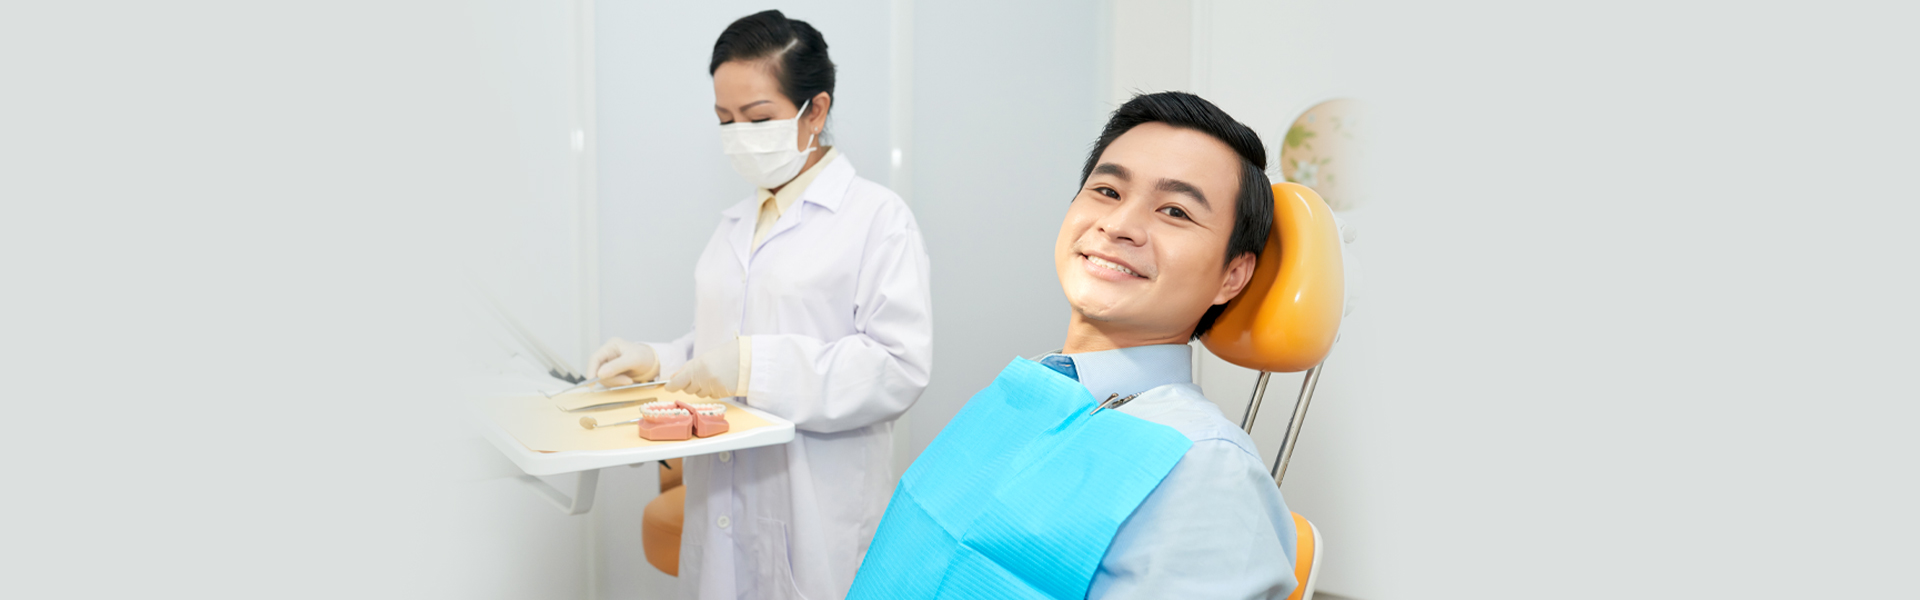 What is the Importance and Benefits of Dental Hygiene 2022?